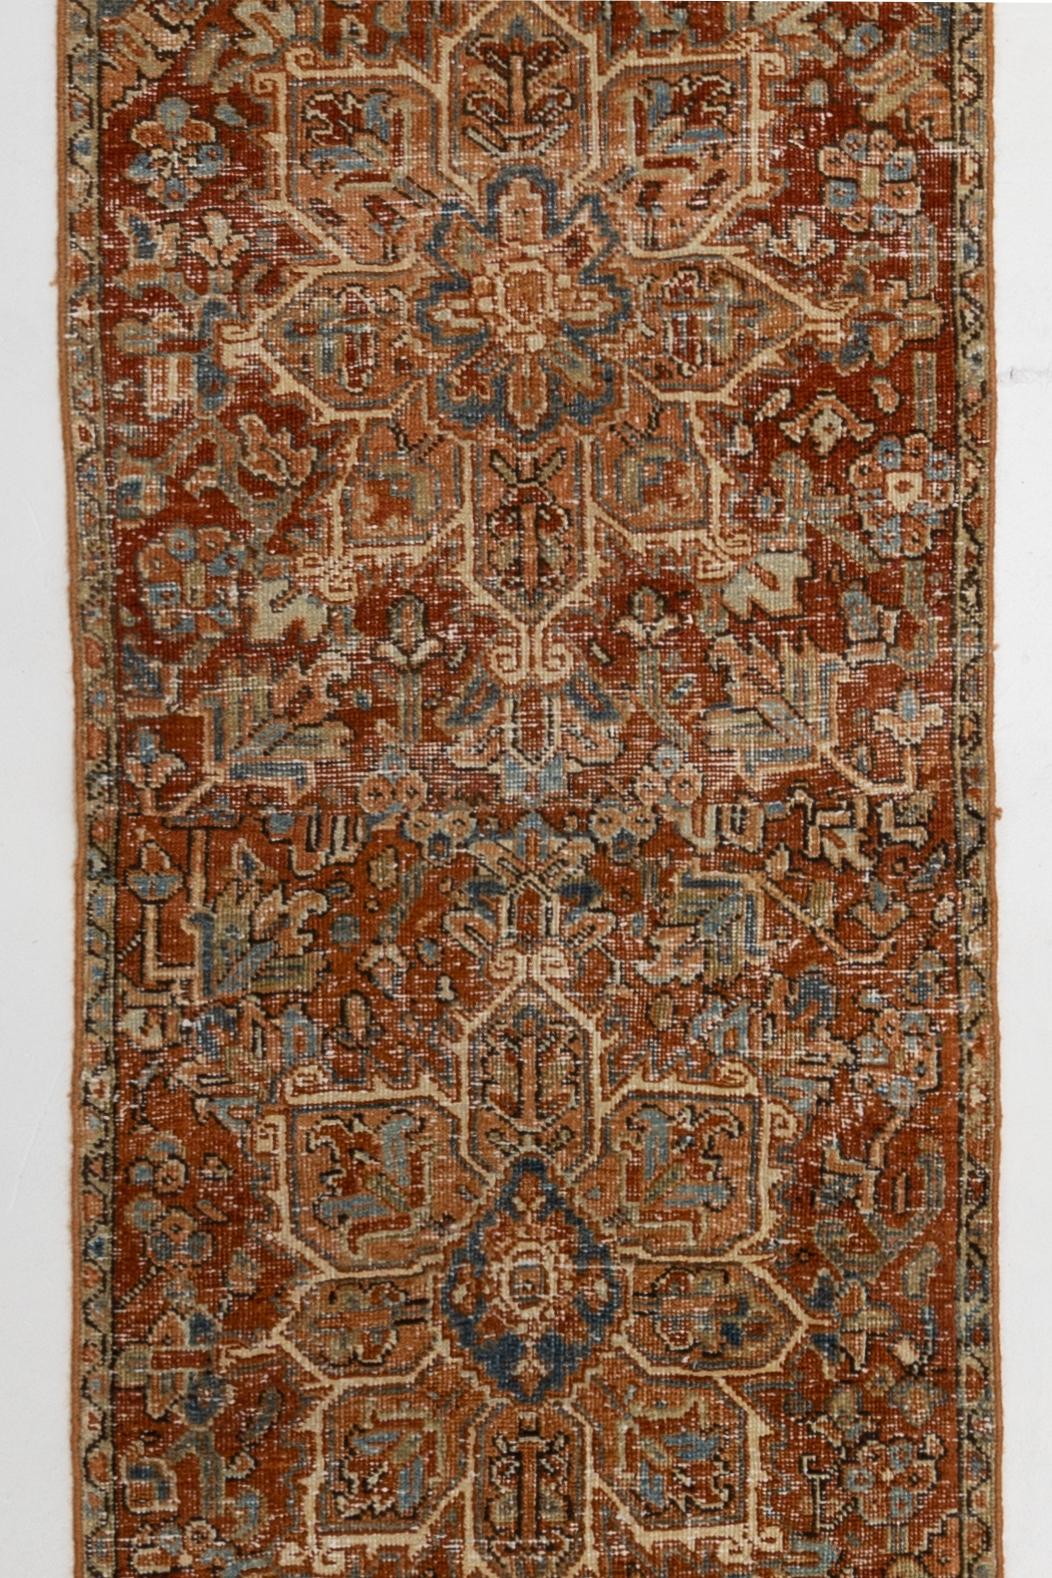 Age: Circa 1910

Colors: tan, blue, brown

Pile: low

Wear Notes: 2

Material: Wool on cotton. 

Wear Guide:
Vintage and antique rugs are by nature, pre-loved and may show evidence of their past. There are varying degrees of wear to vintage rugs;